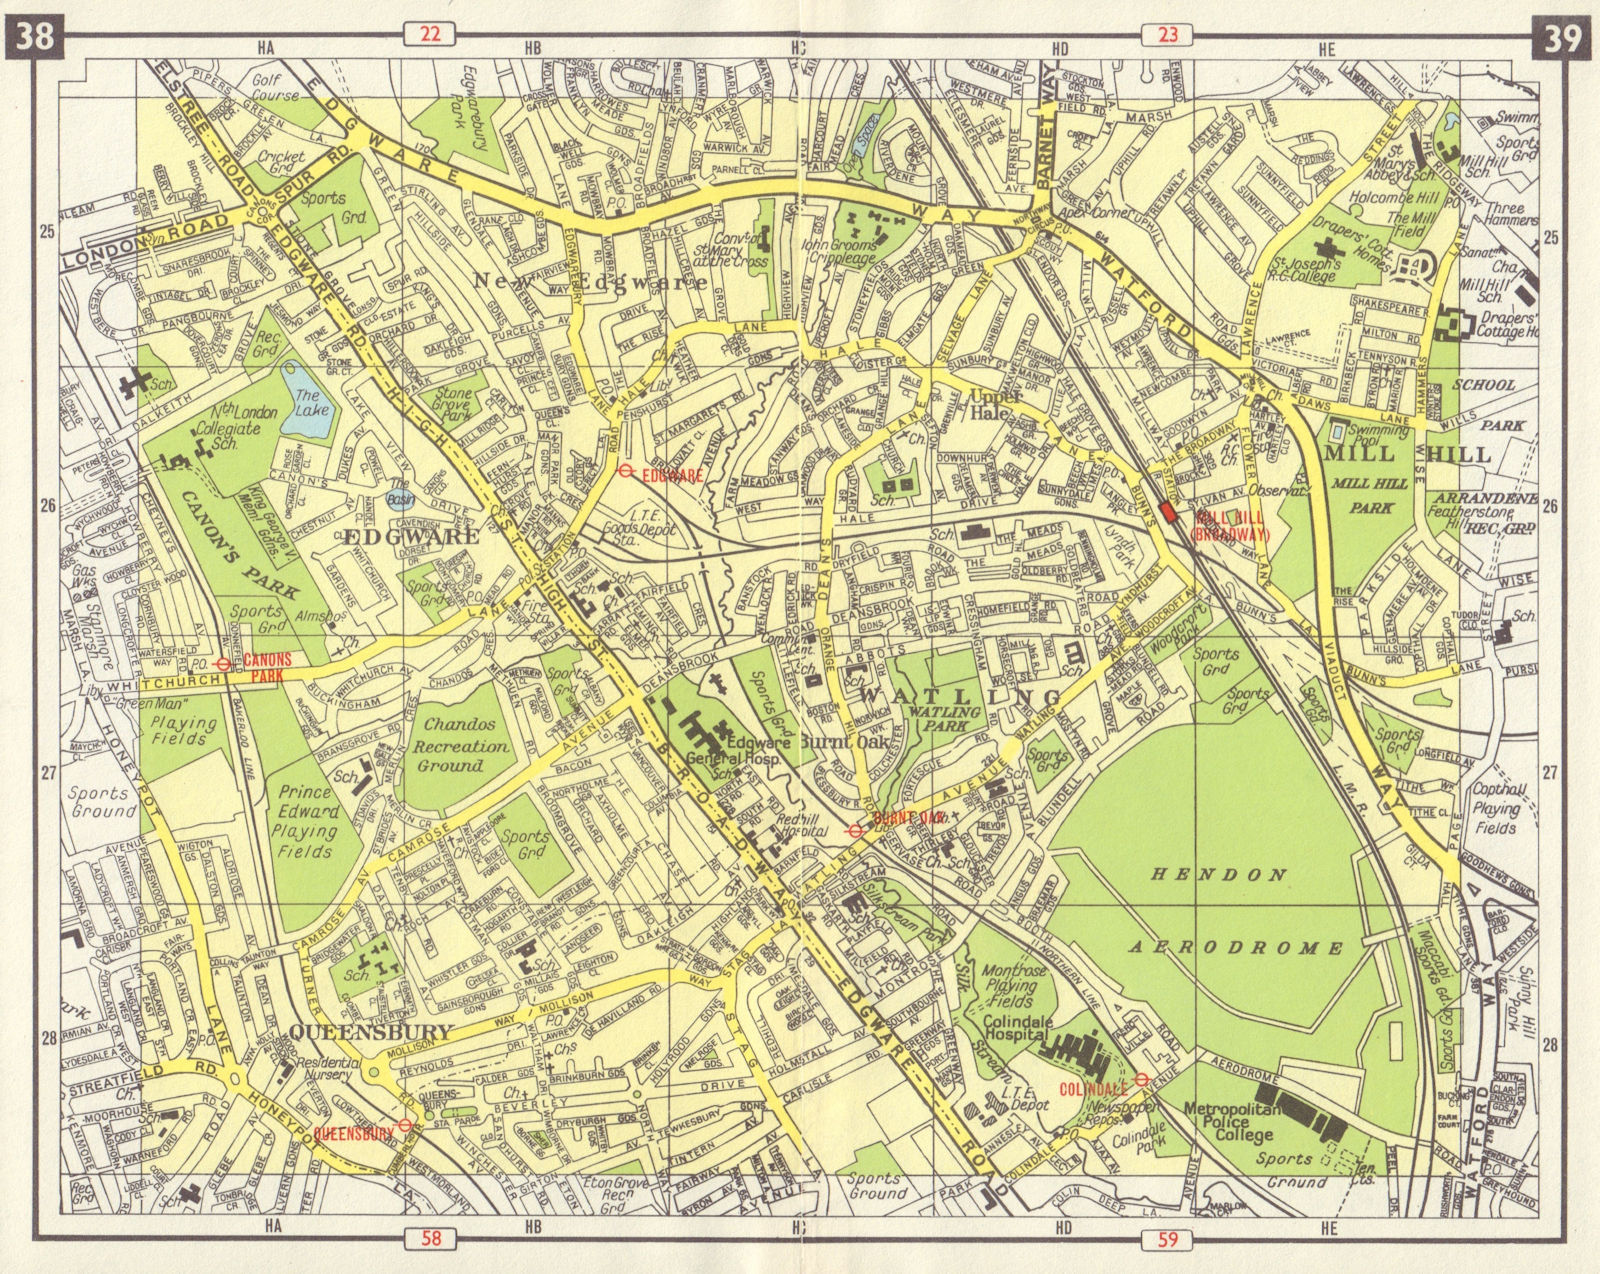 NW LONDON Edgware Mill Hill Burnt Oak Queensbury Colindale M1 projected 1965 map